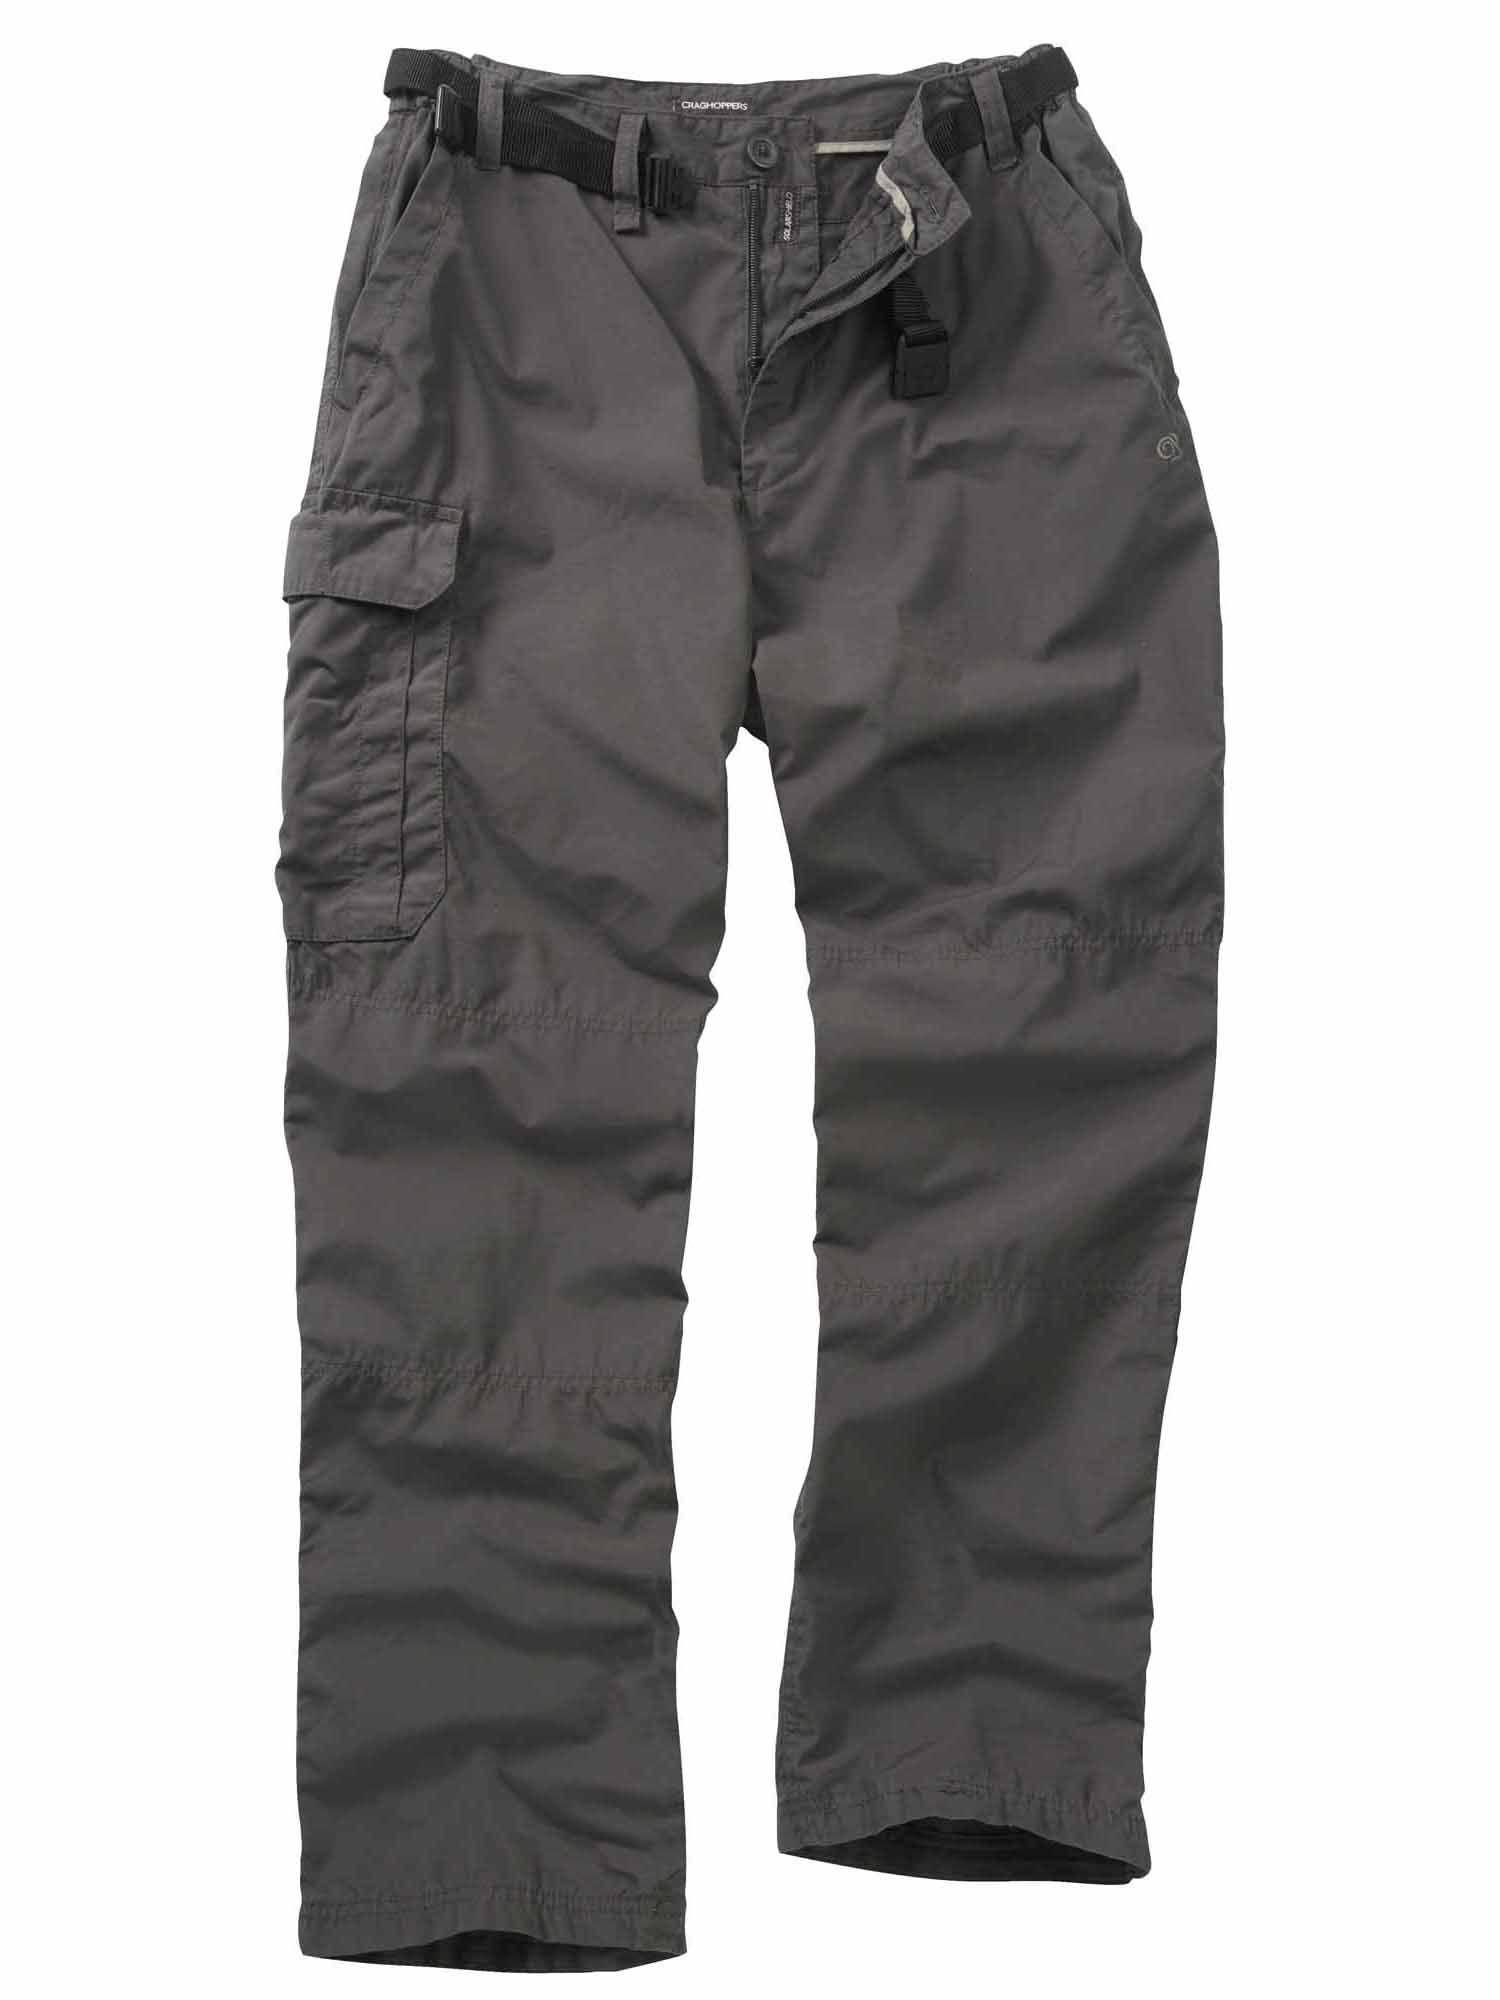 Craghoppers Classic Kiwi Trousers in Metallic for Men | Lyst